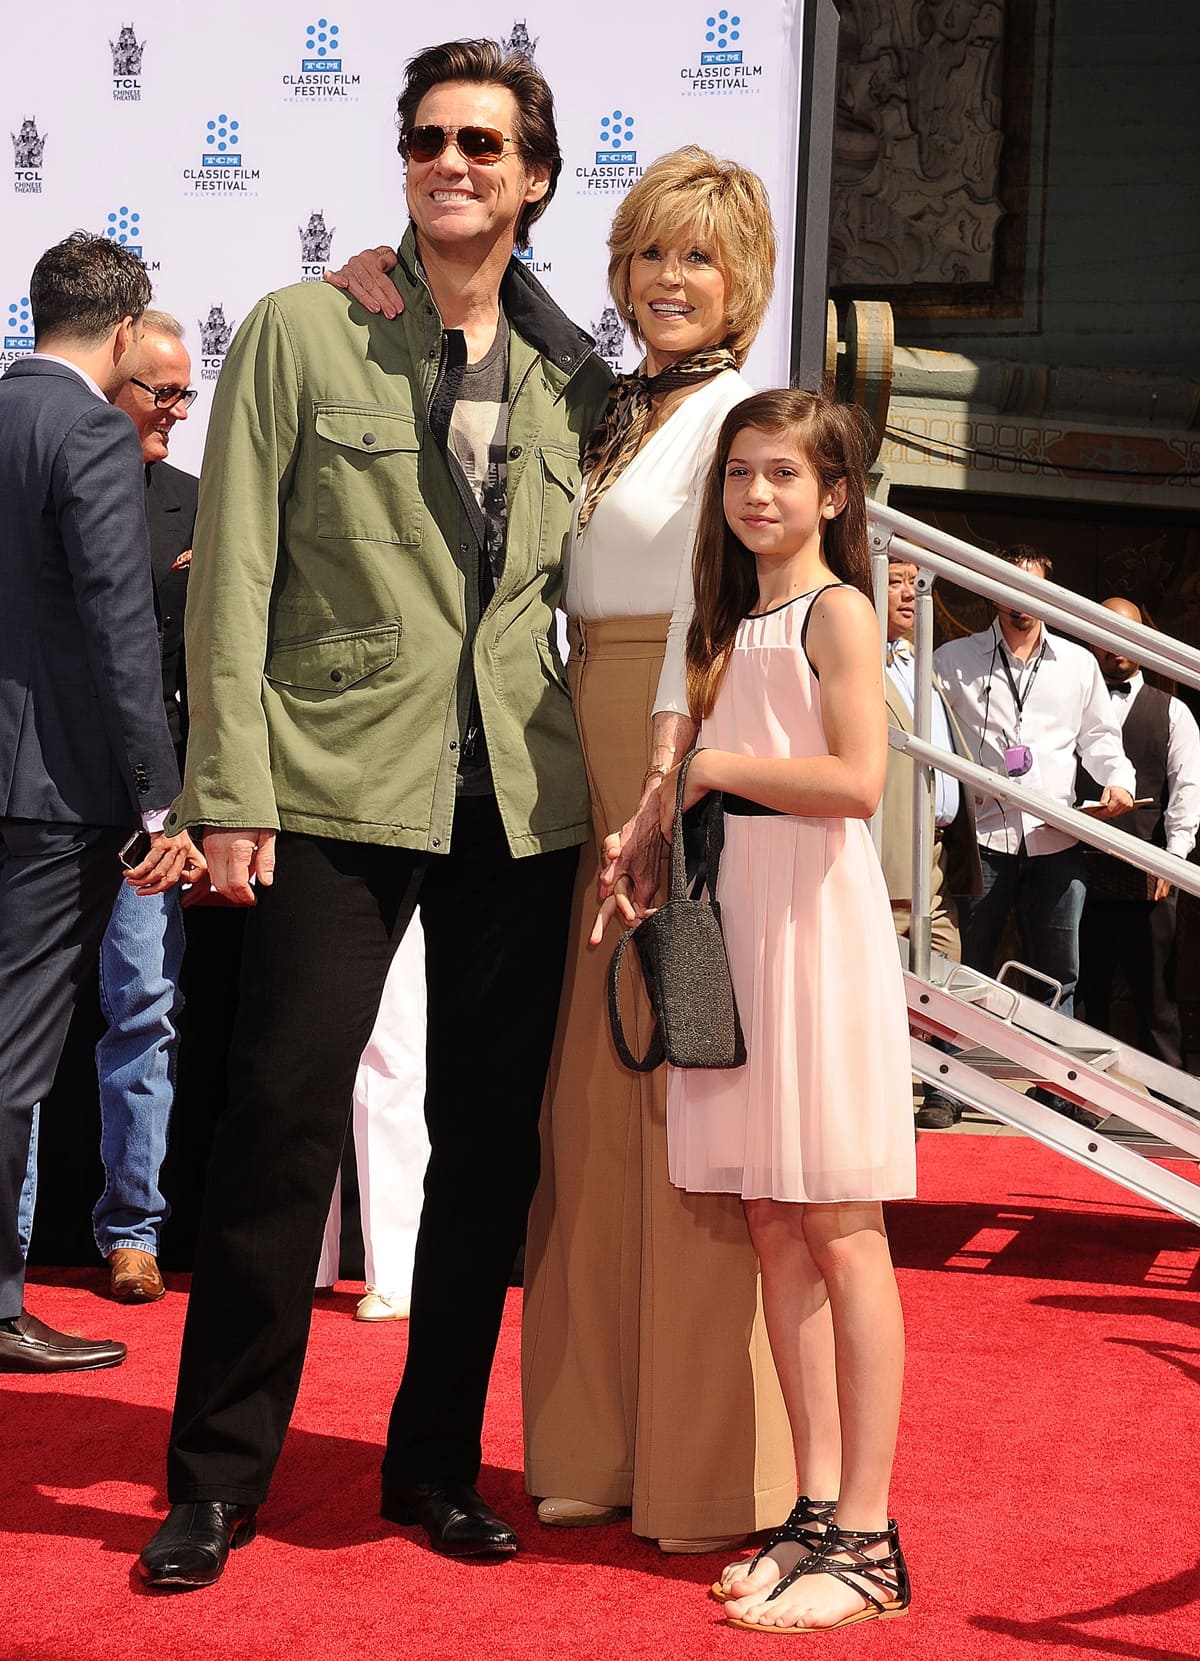 Jane Fonda was joined by Jim Carrey and her granddaughter Viva Vadim at her Handprint/Footprint Ceremony during the 2013 TCM Classic Film Festival